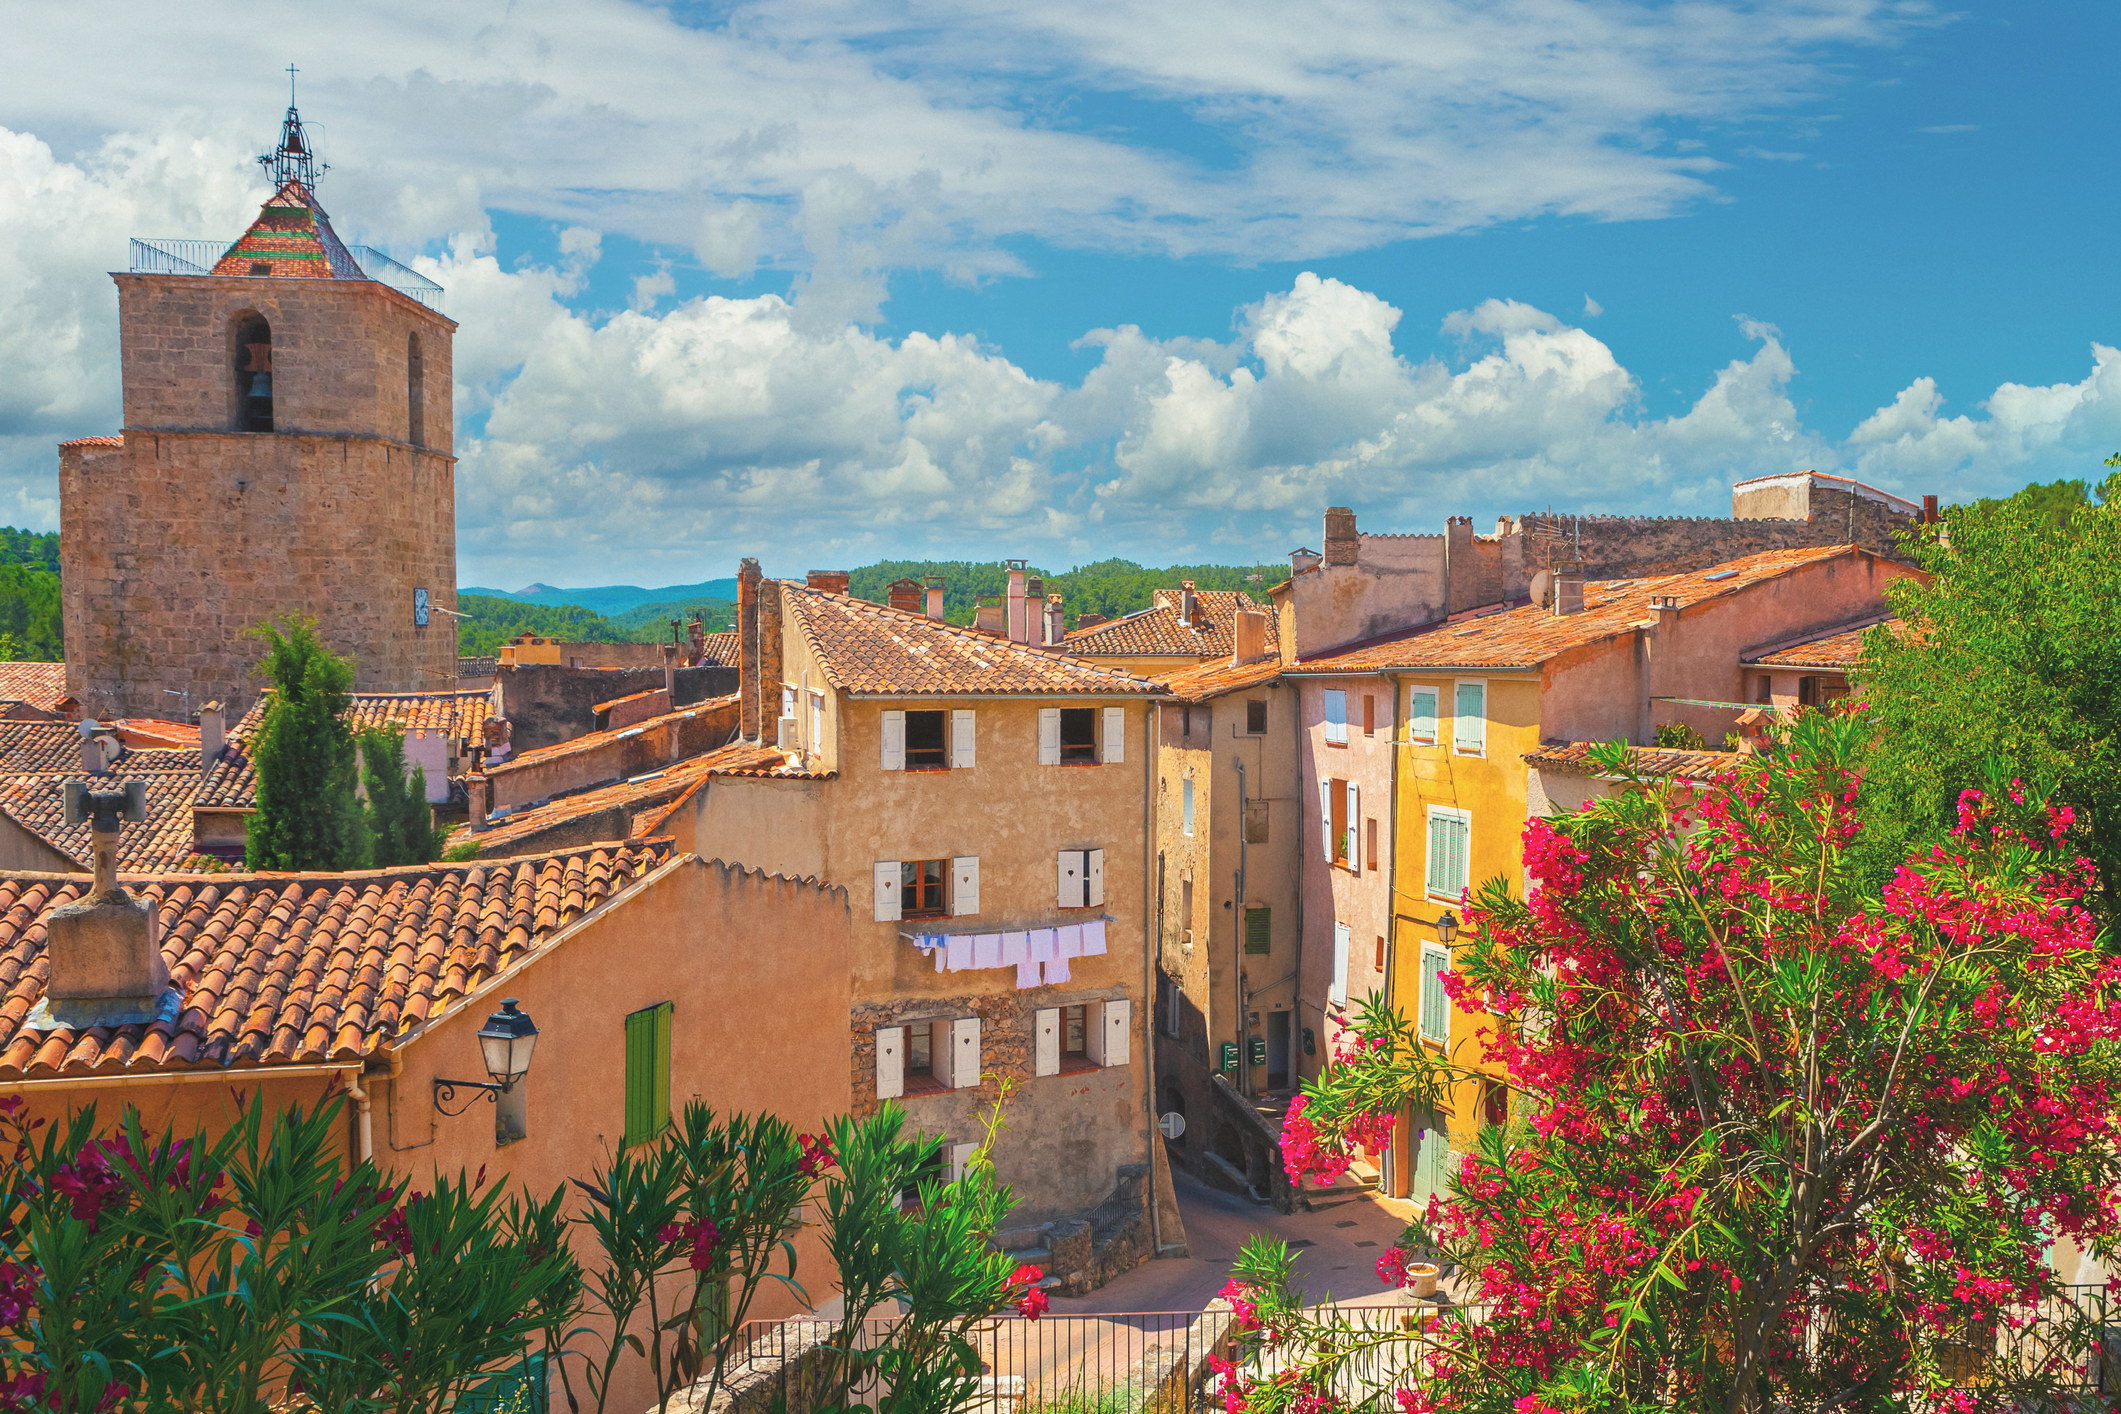 A quaint and colorful town in the South of France